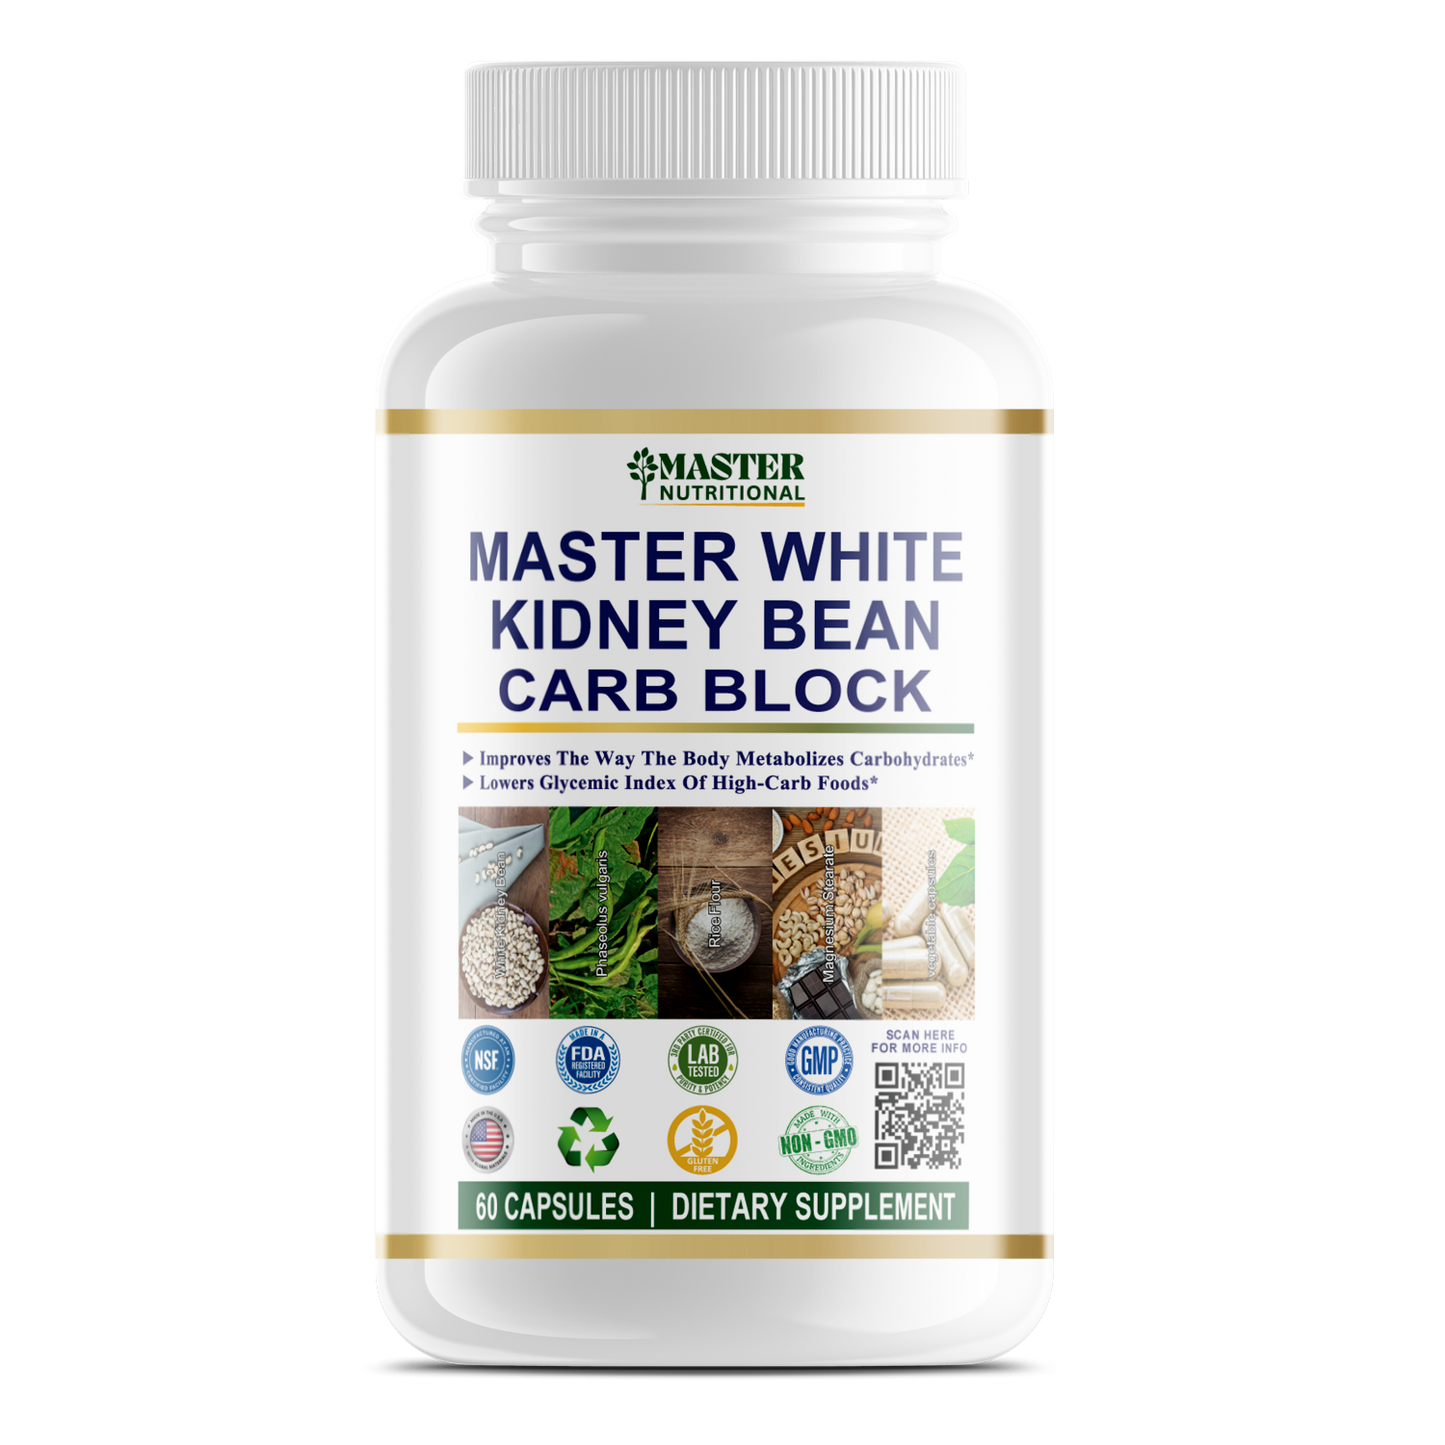 Master White Kidney Bean Carb Block: Solution for Effective Carb Blocking